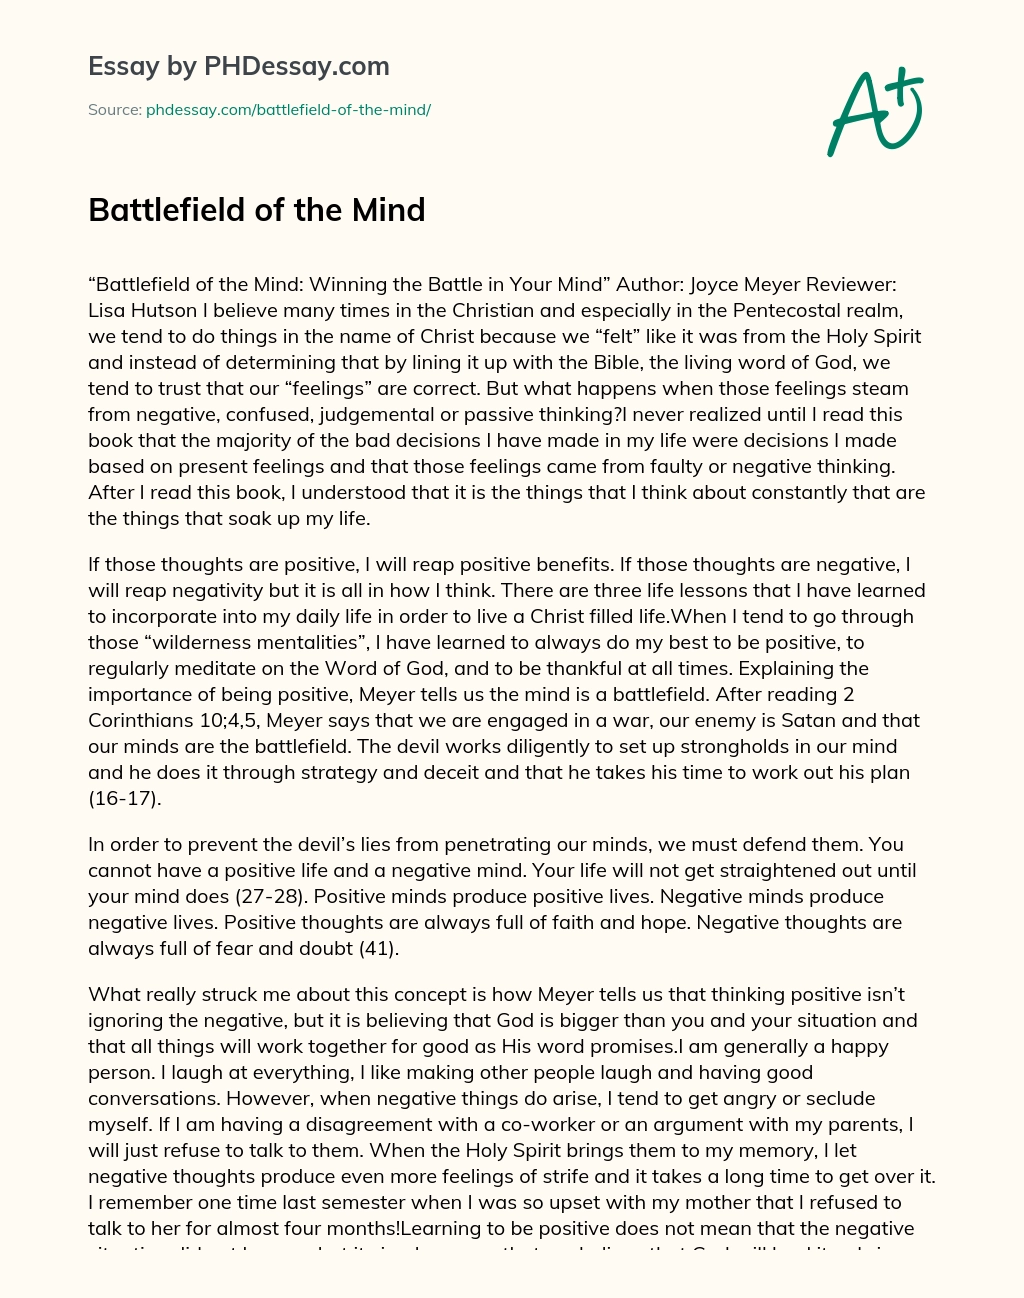 Battlefield of the Mind essay